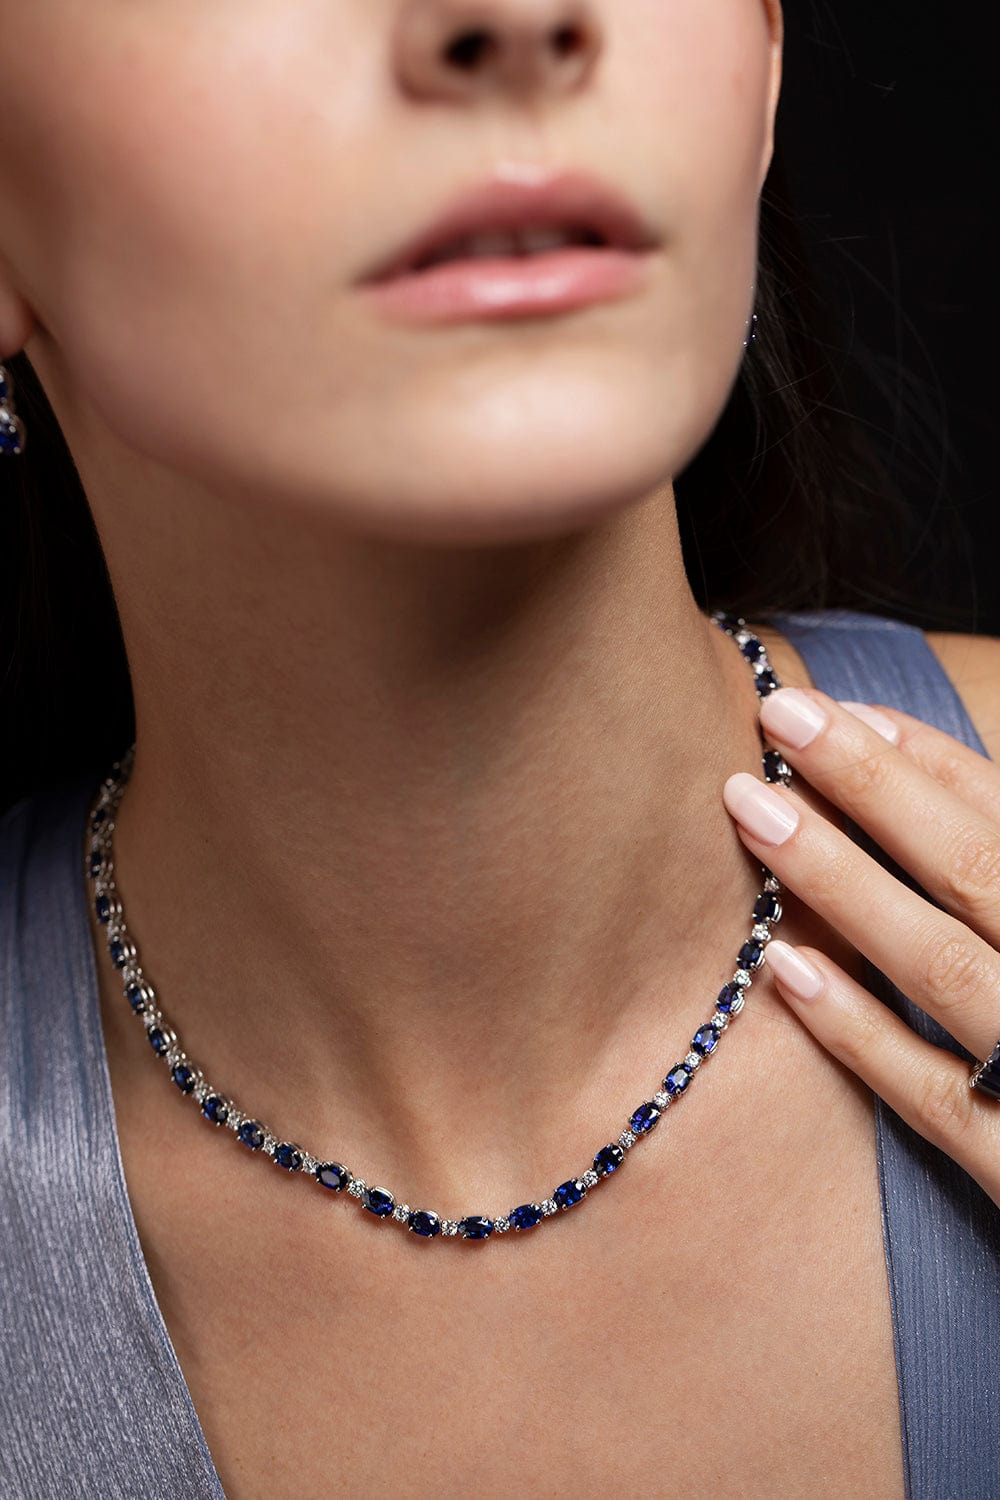 BAYCO-Oval Blue Sapphire and Diamond Necklace-PLAT